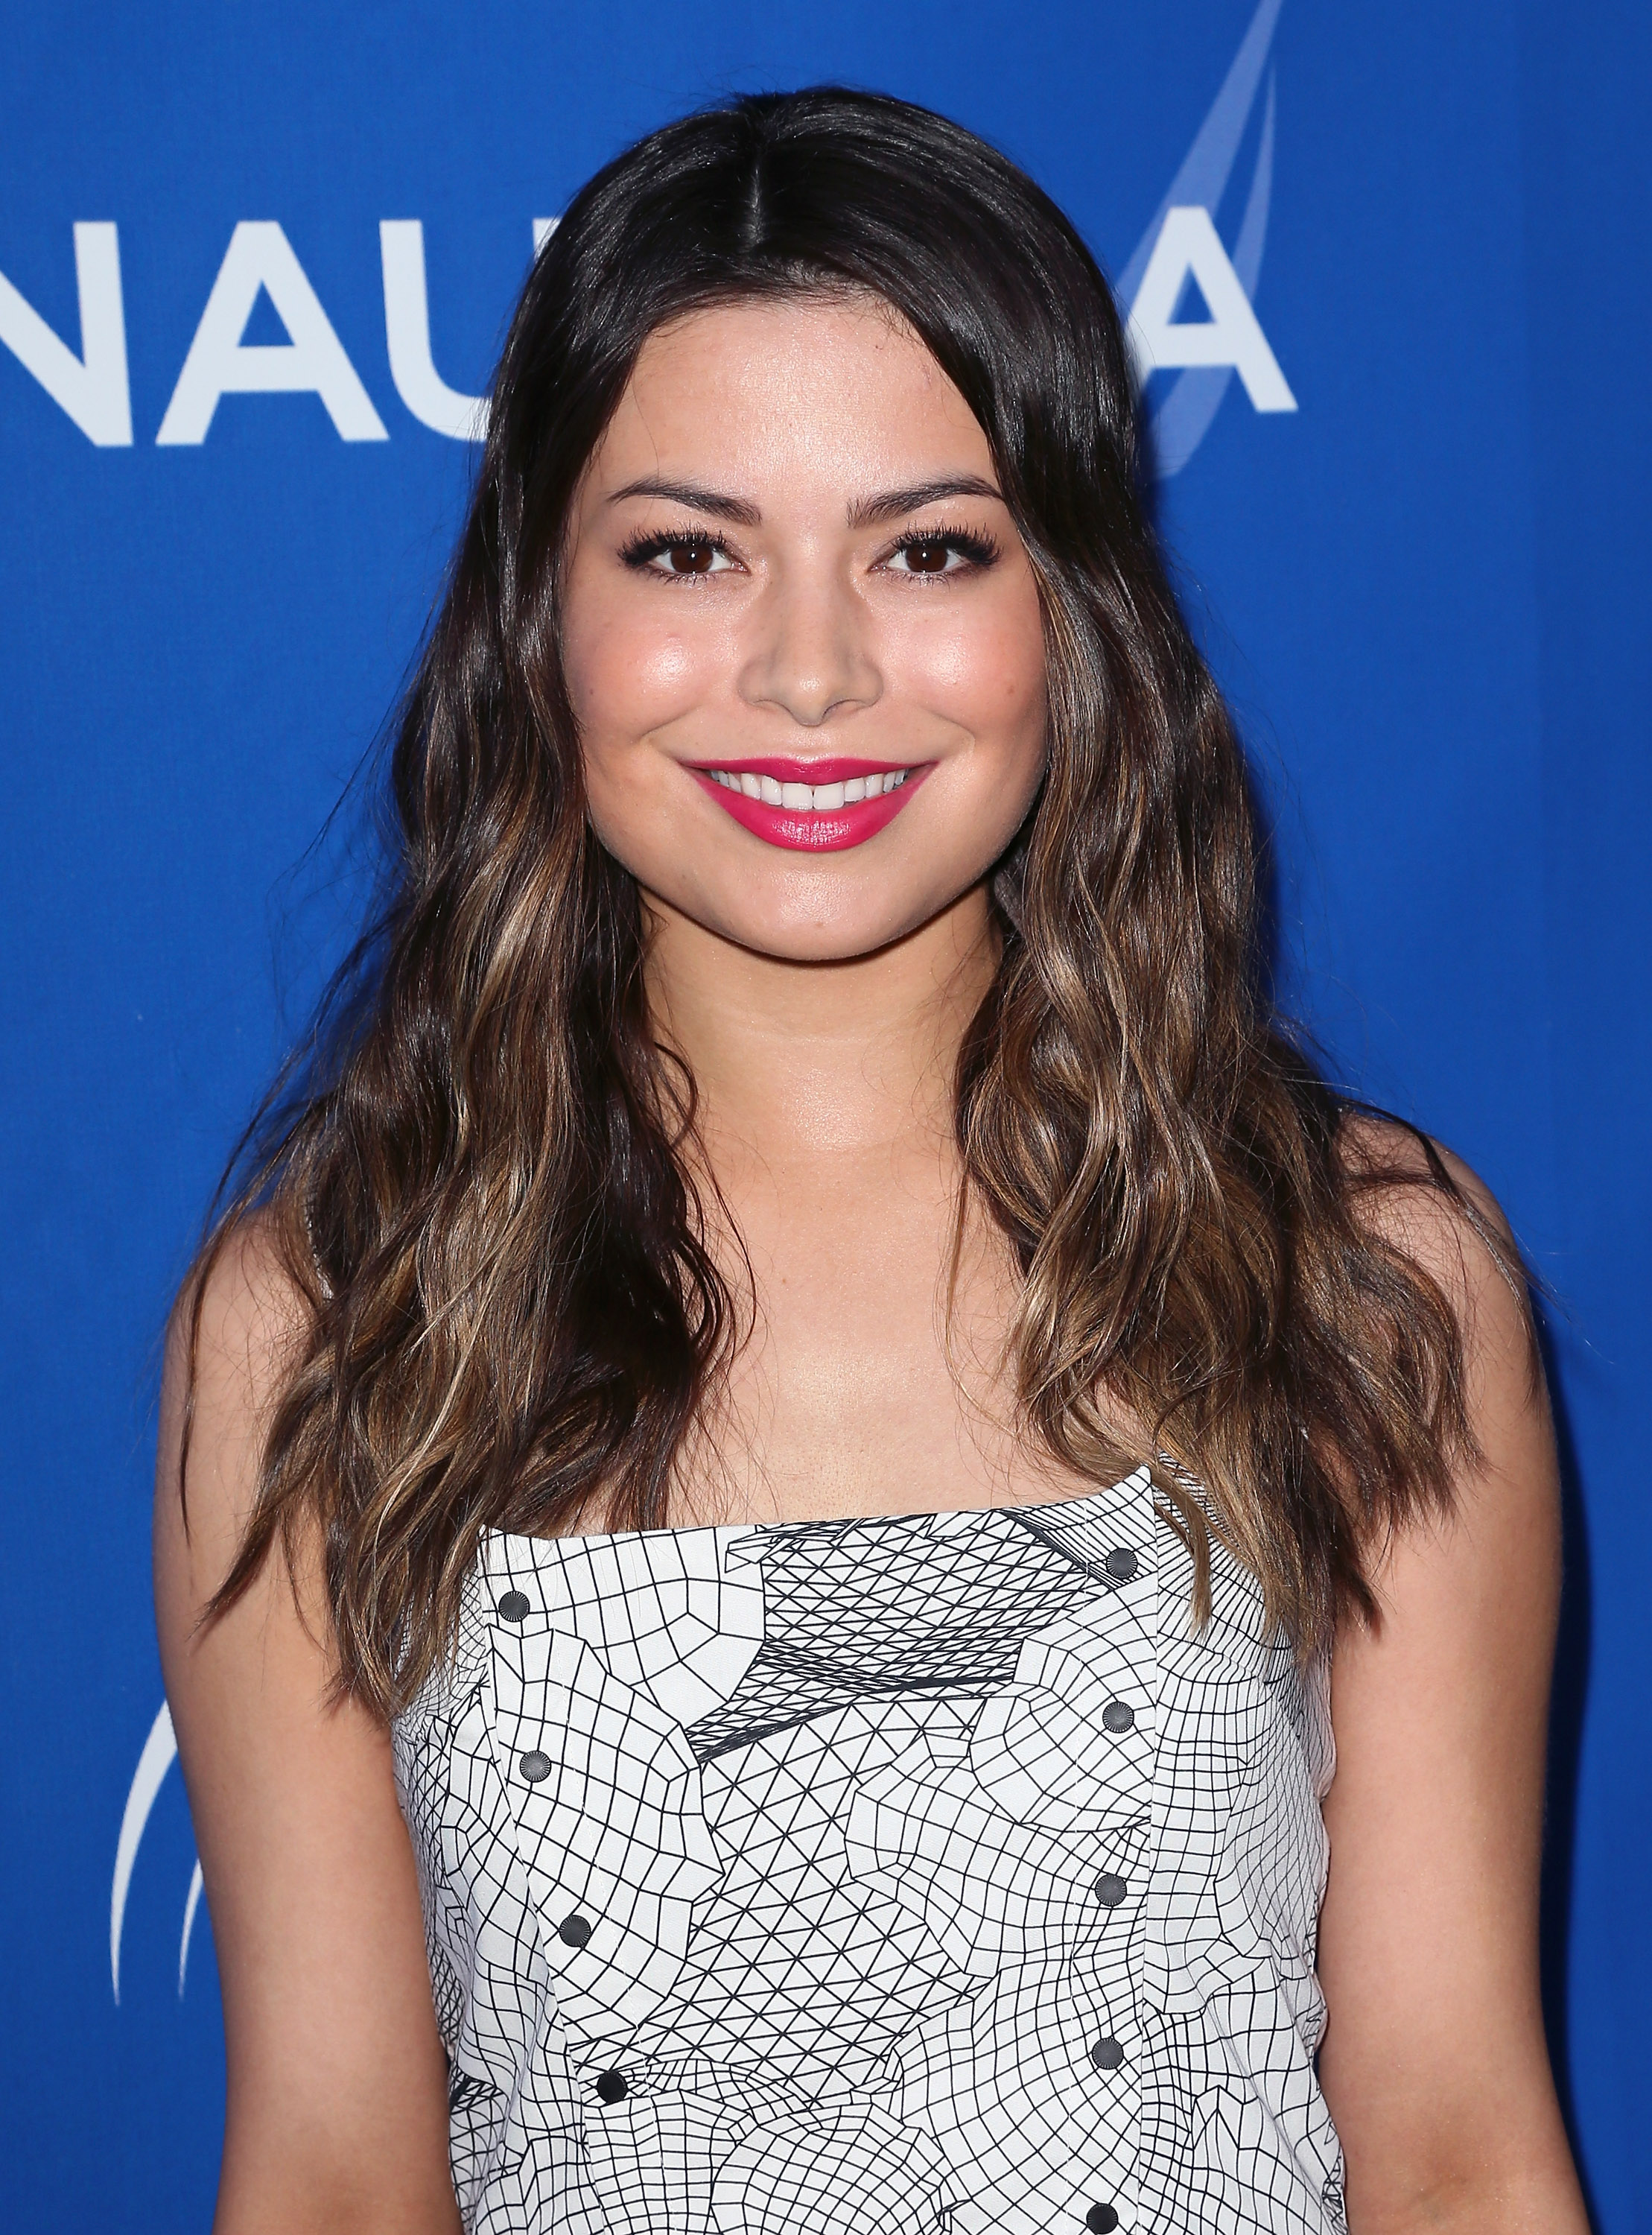 miranda cosgrove actress nautica leaked movies topless near boobs confidential oceana attends lingerie magazine monica kissing clips wallpapers